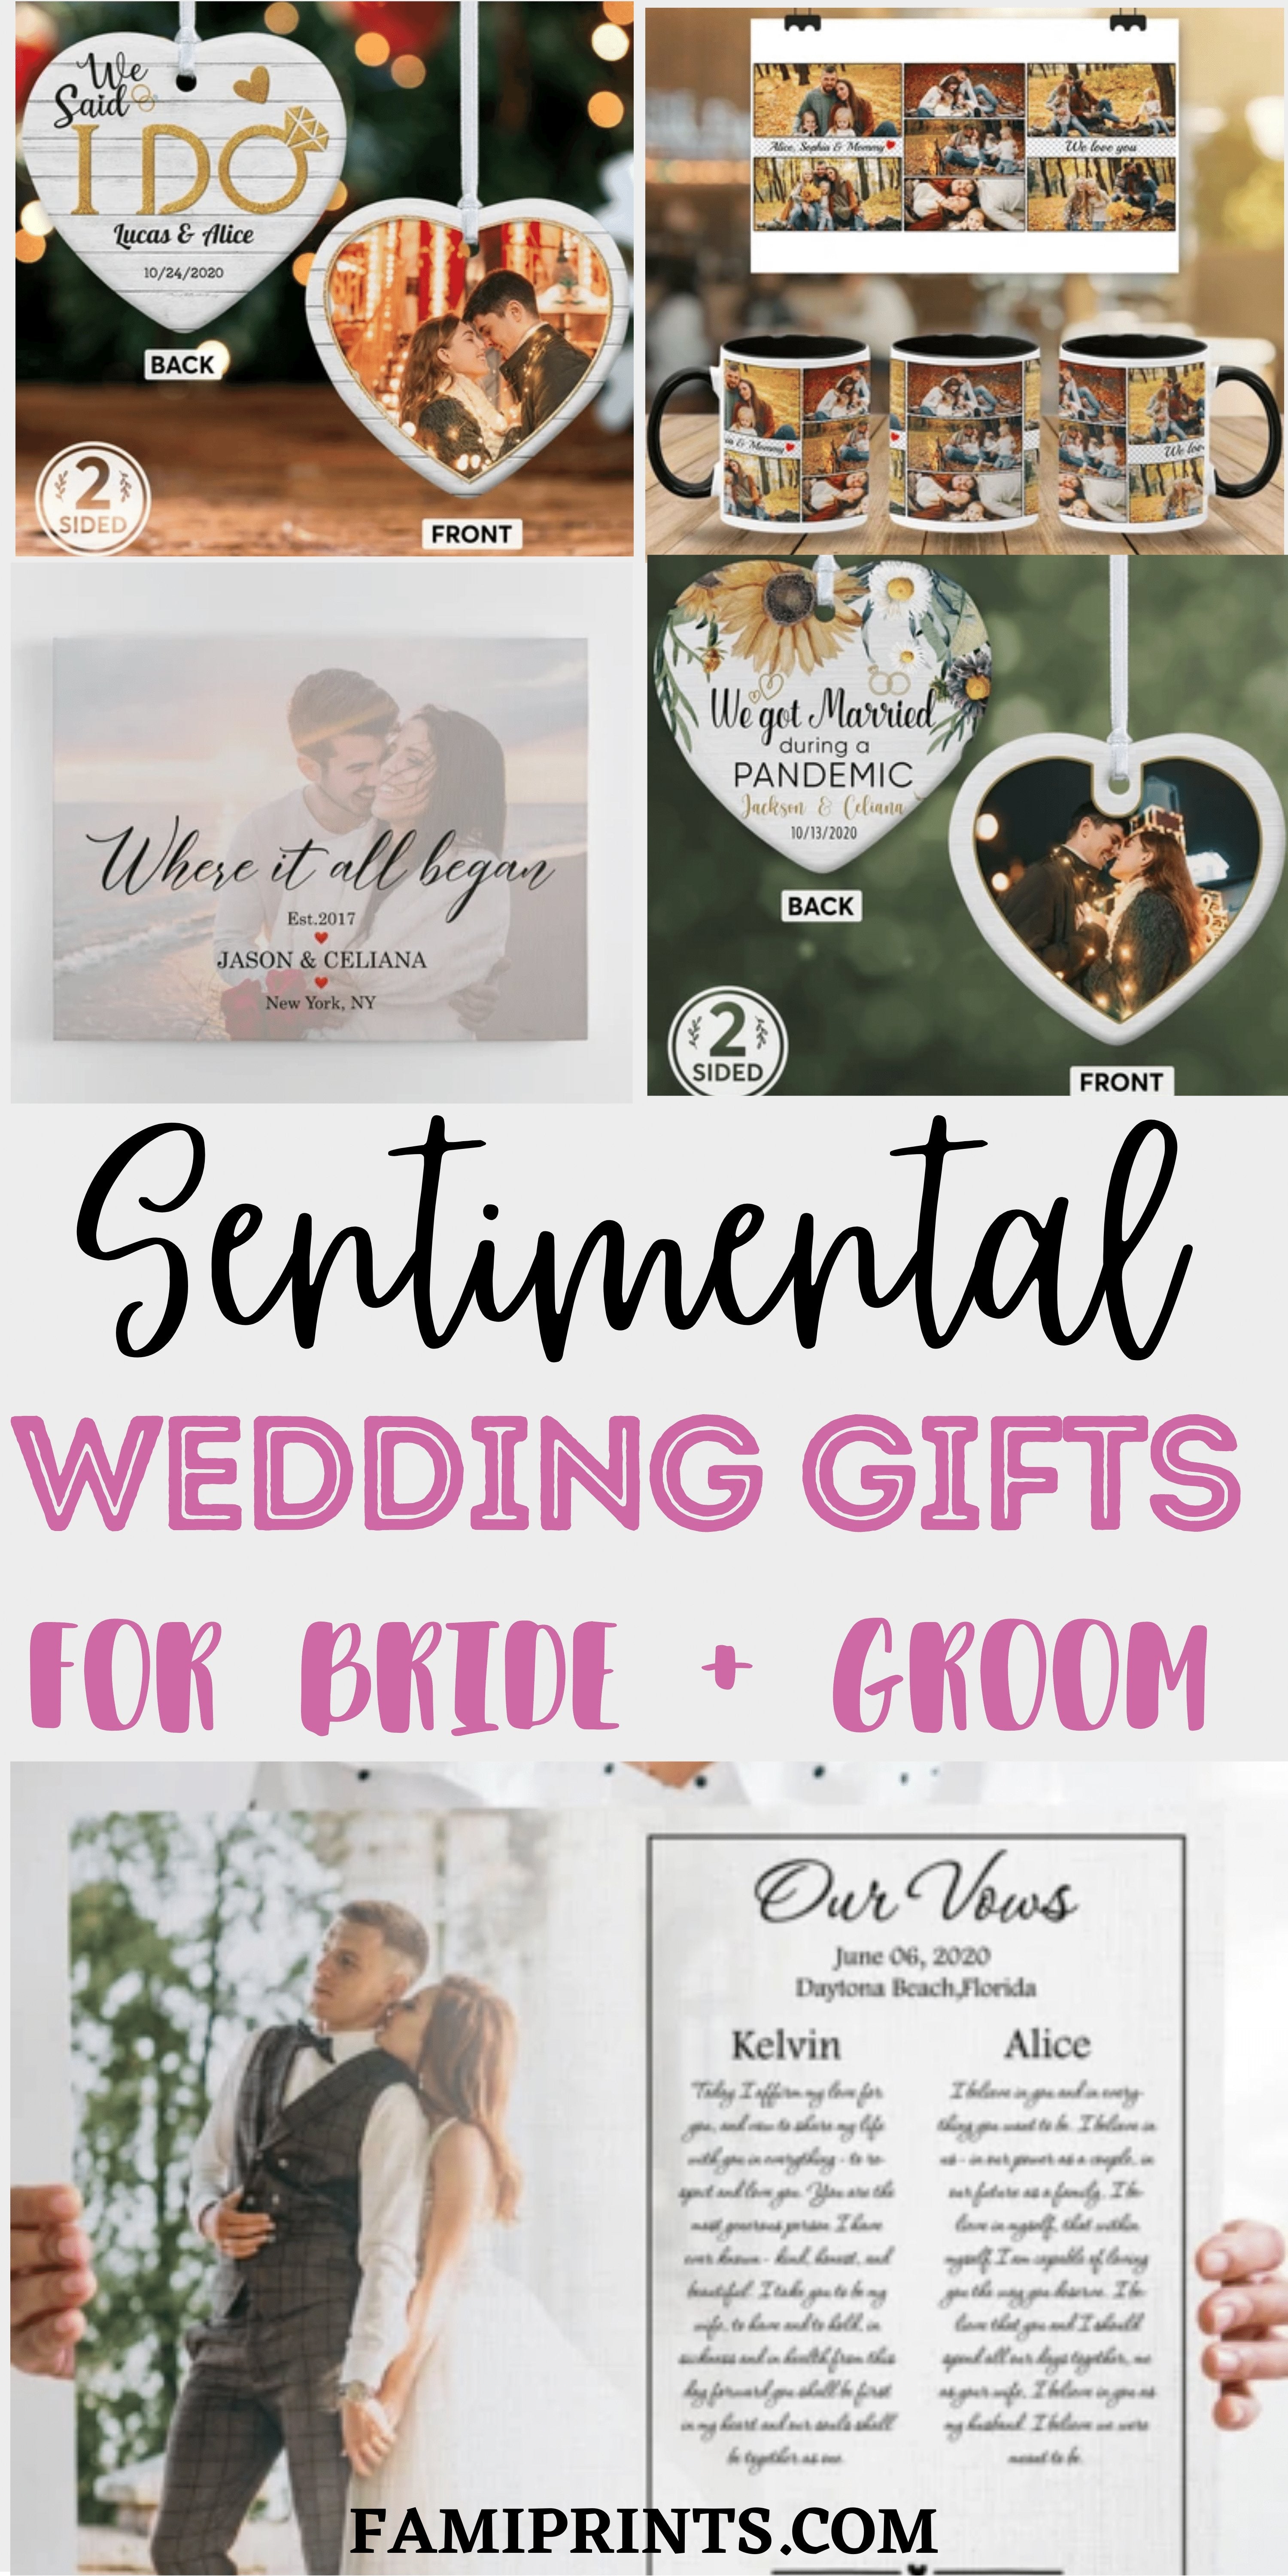 Personalized Wedding Gift Ideas For Bride & Groom | FamiPrints | Trending Personalized Family Gifts